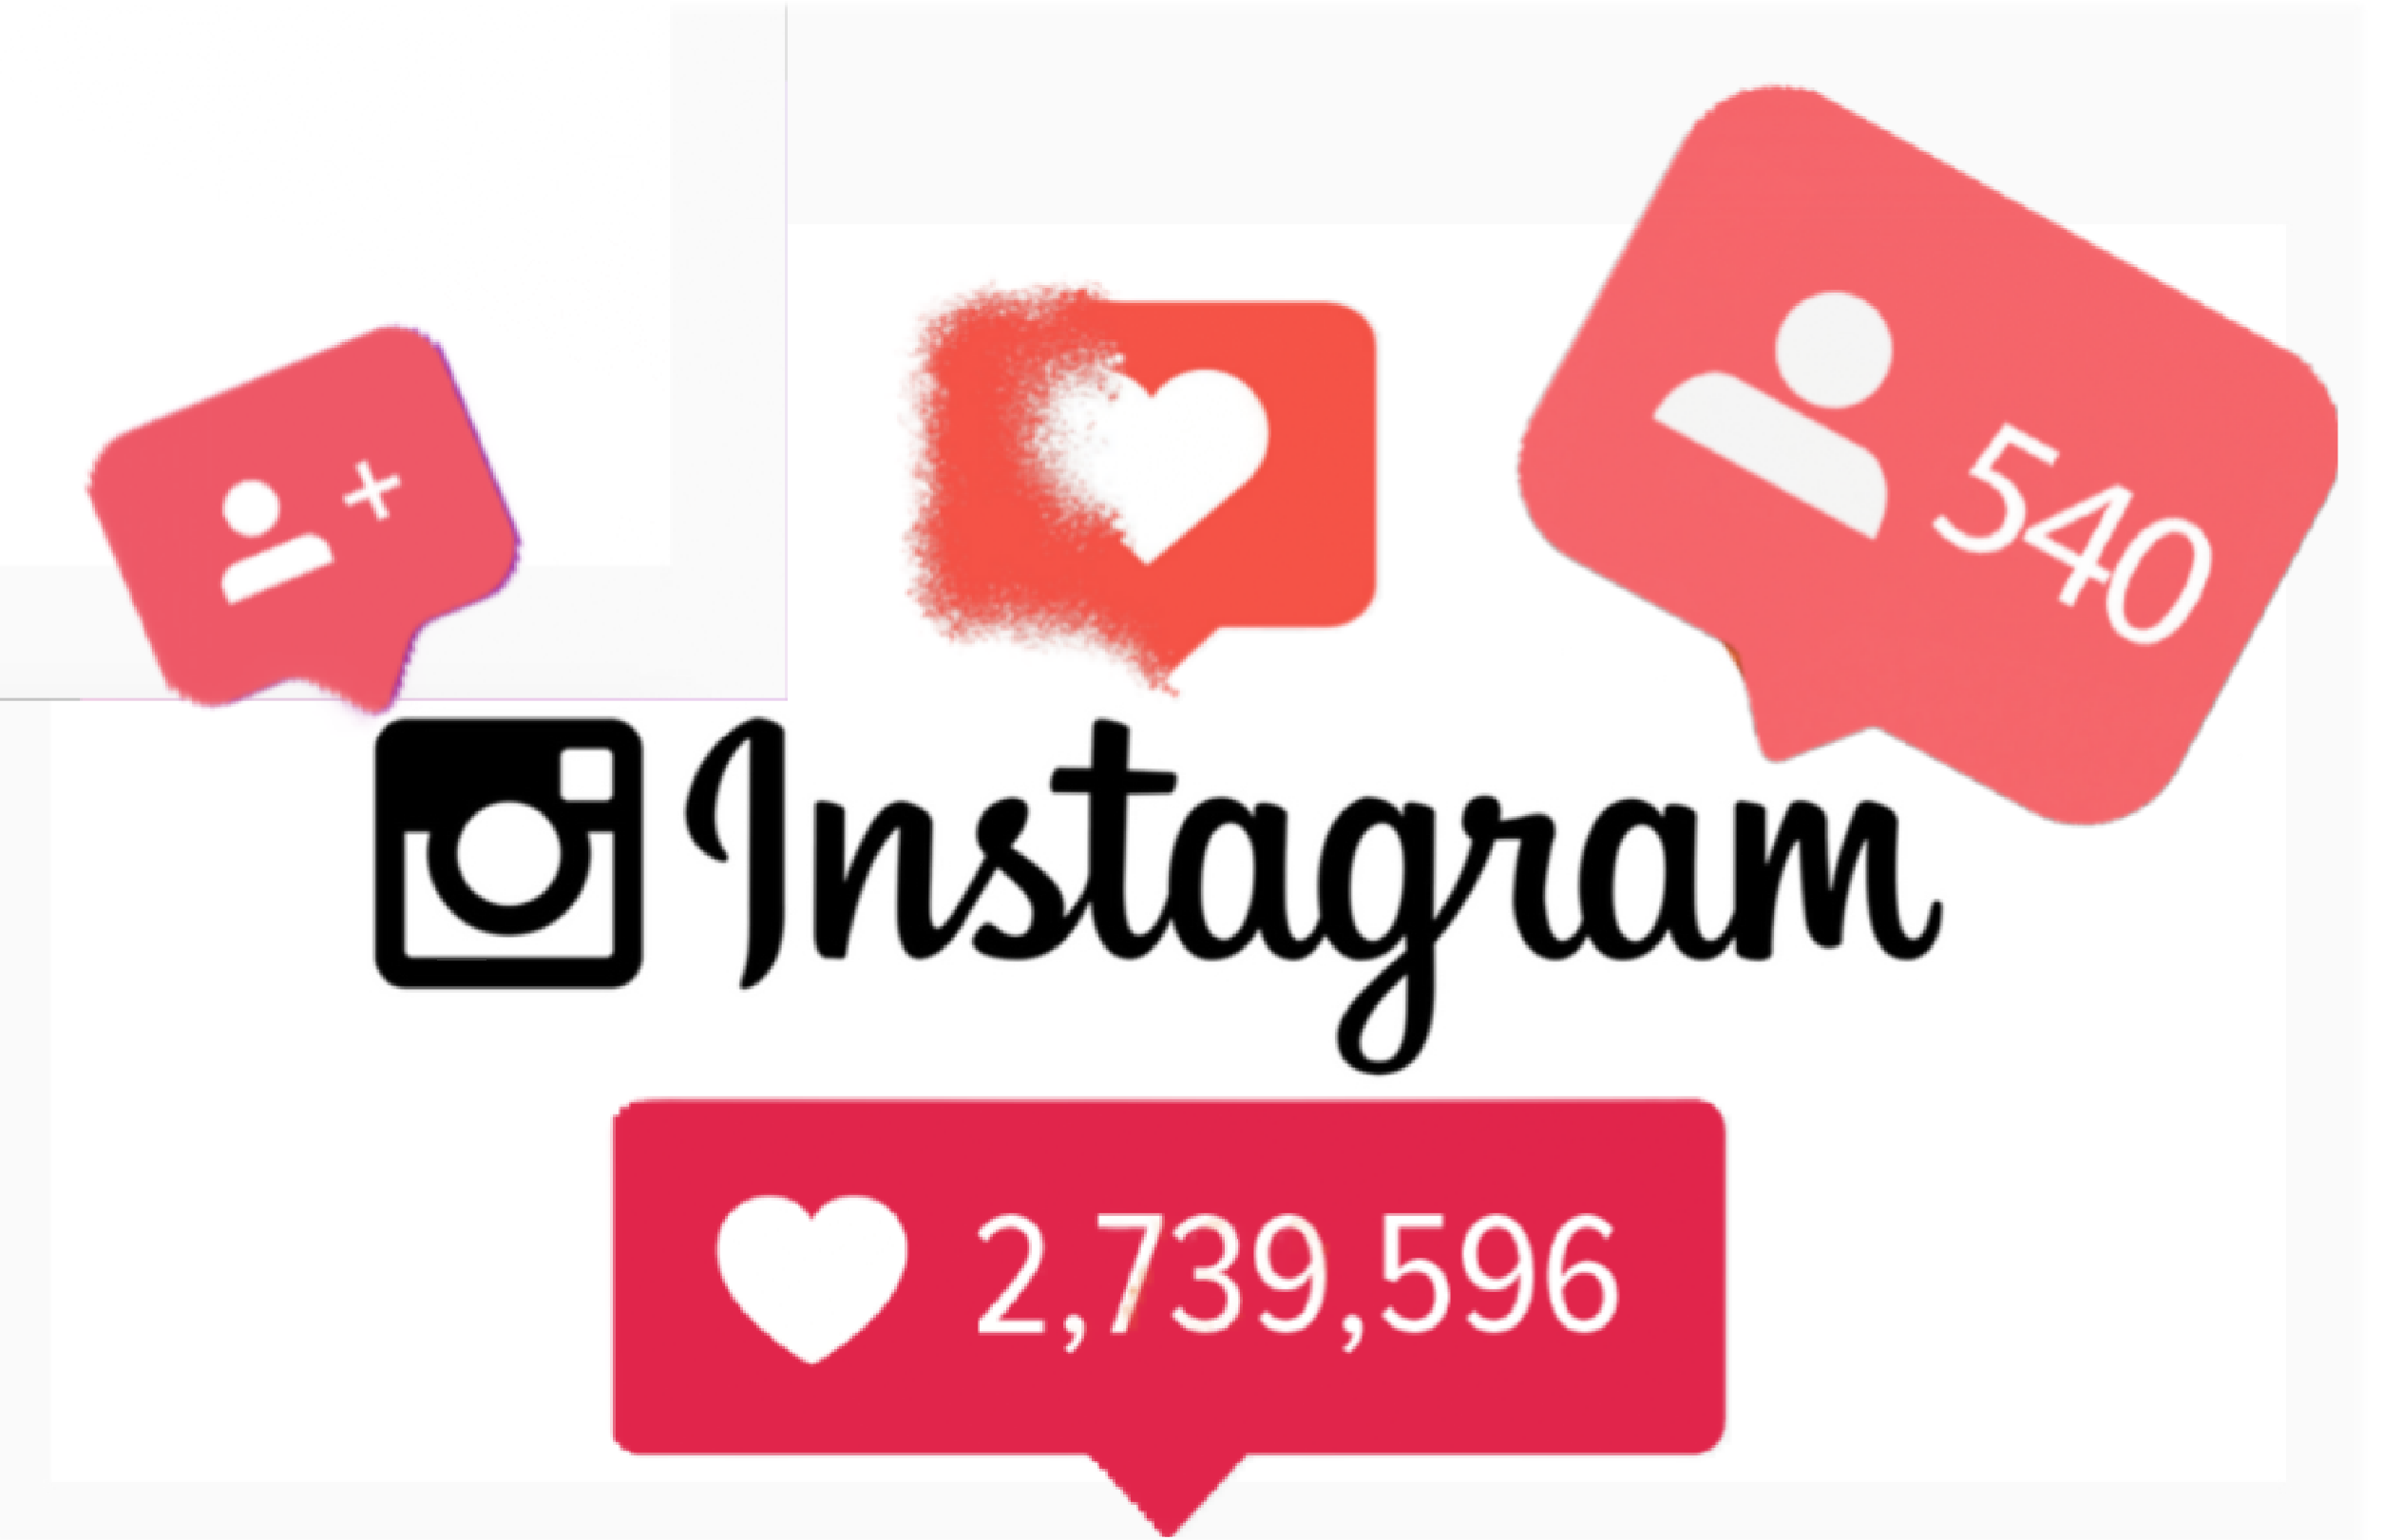 6 Proven methods to get your first 1000 Instagram followers rapidly